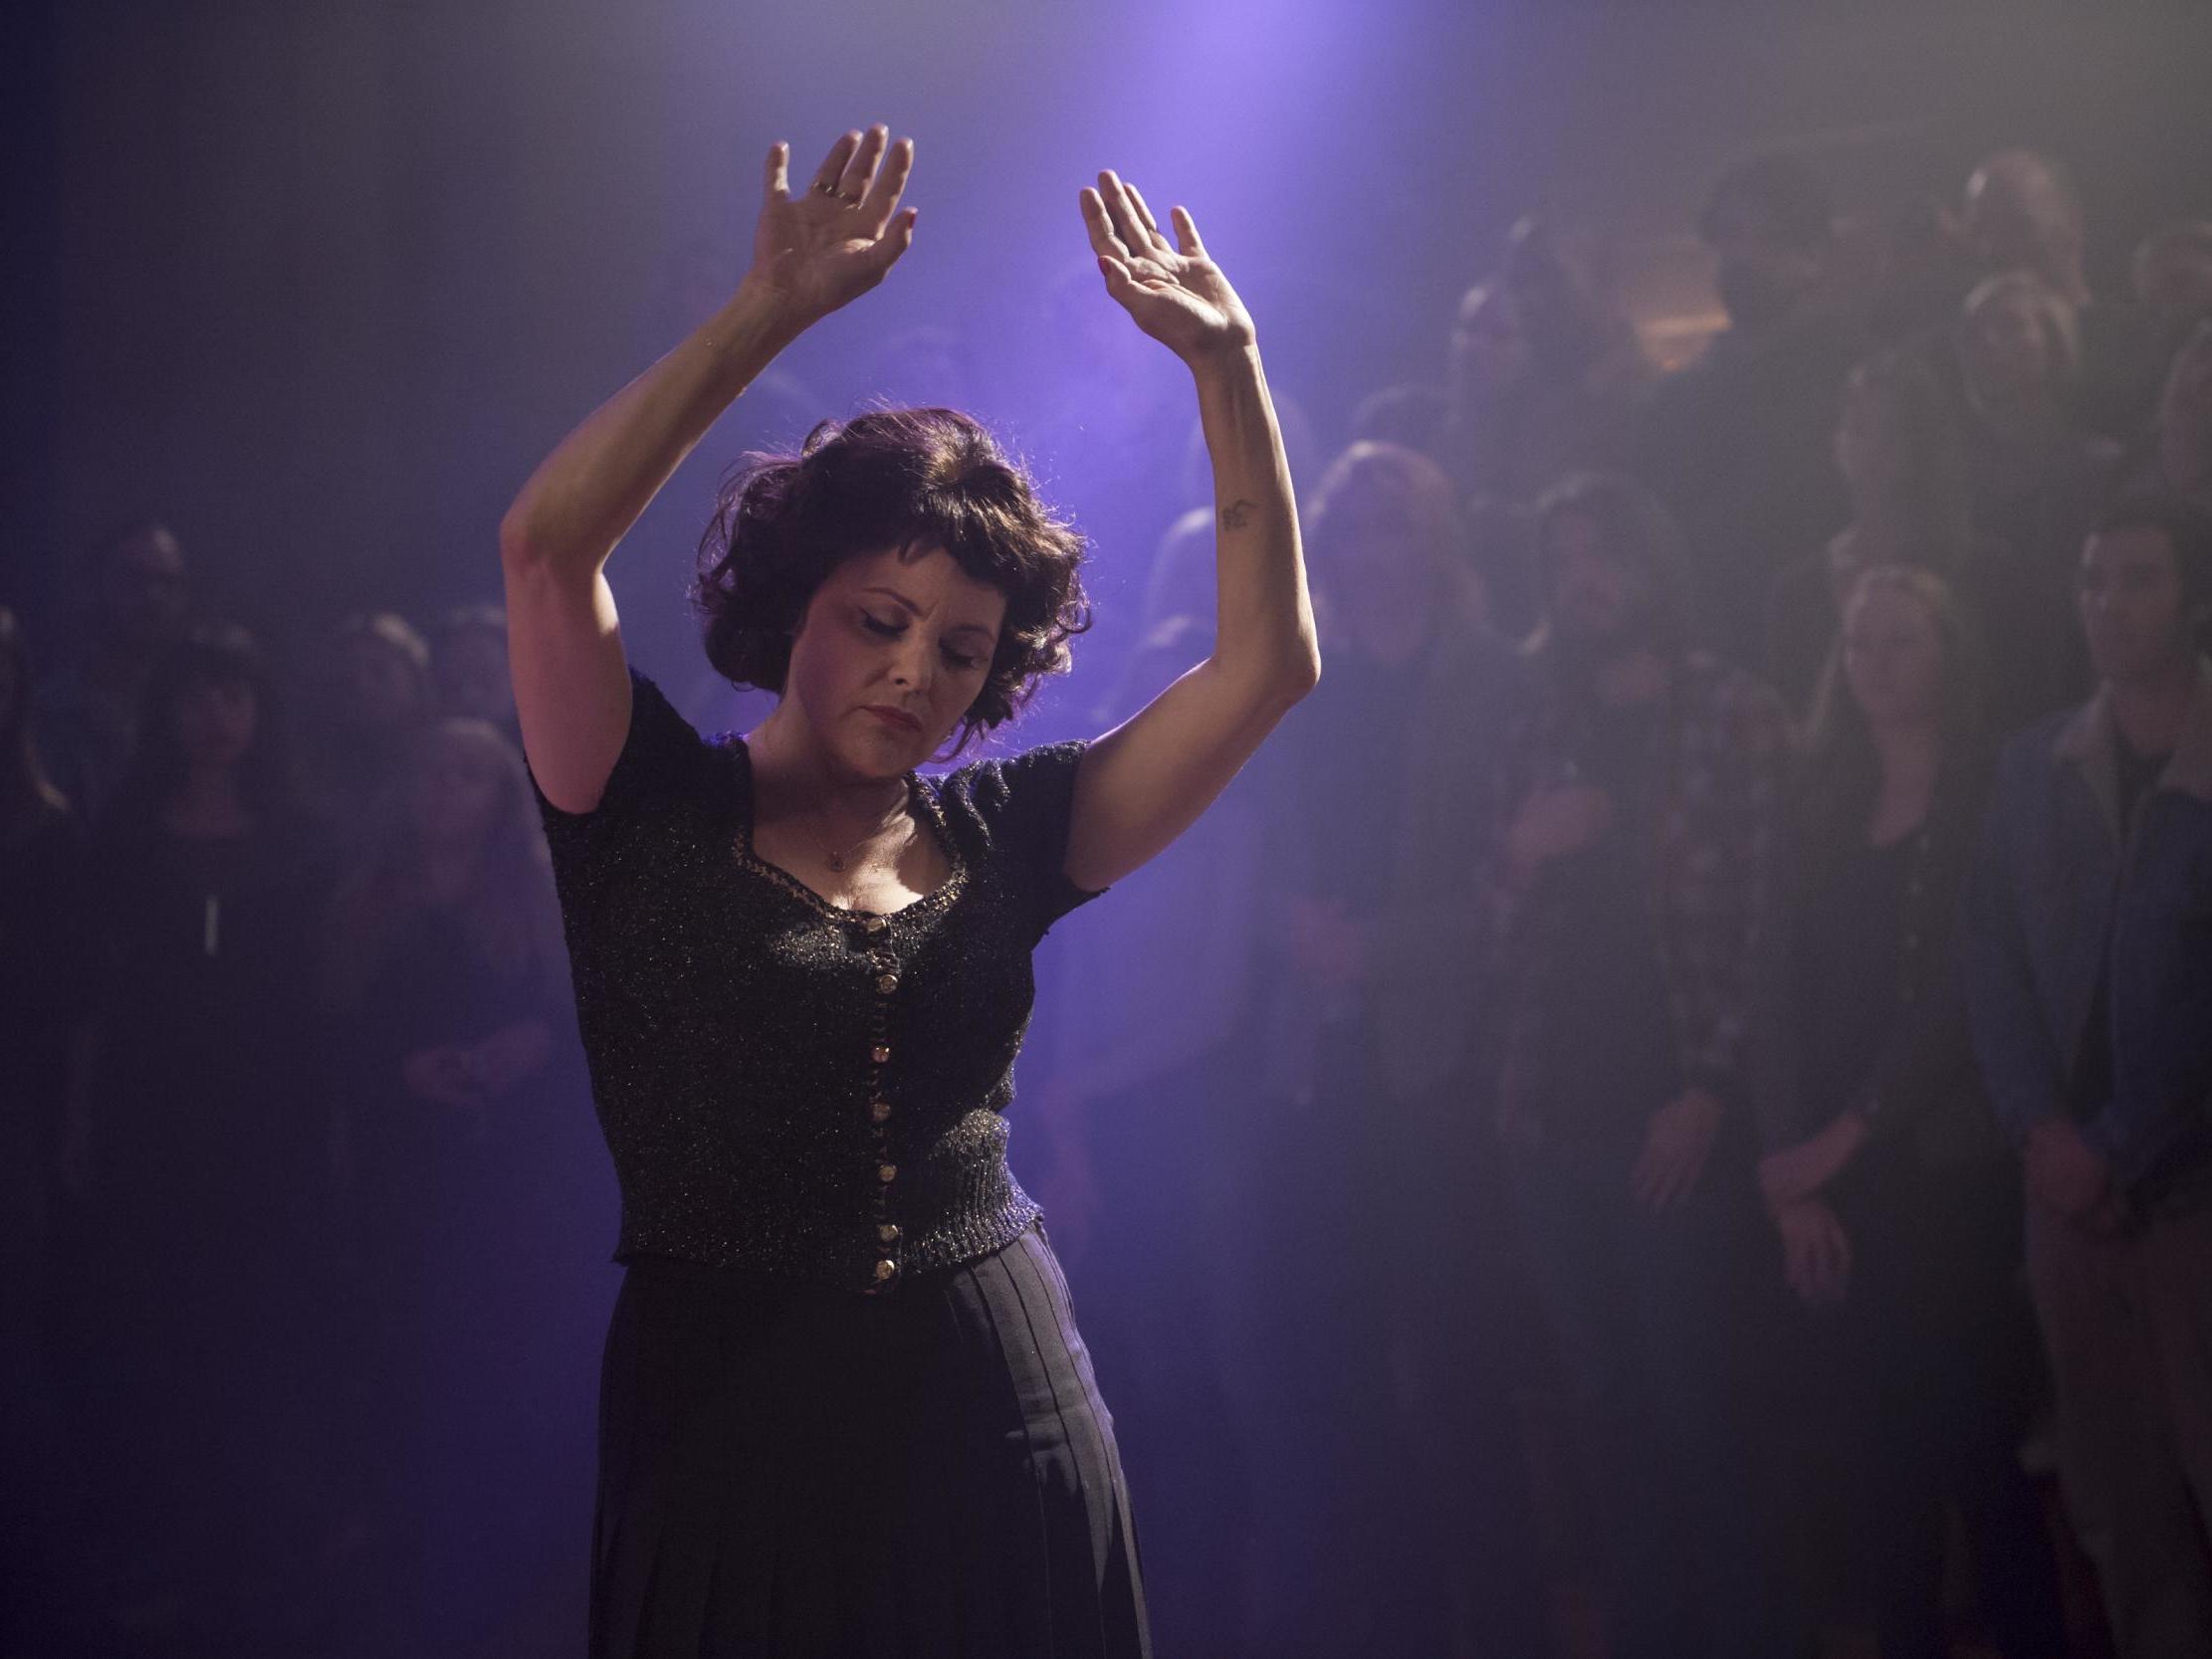 Sherilyn Fenn returned for the 2017 revival series along with almost the entire original cast